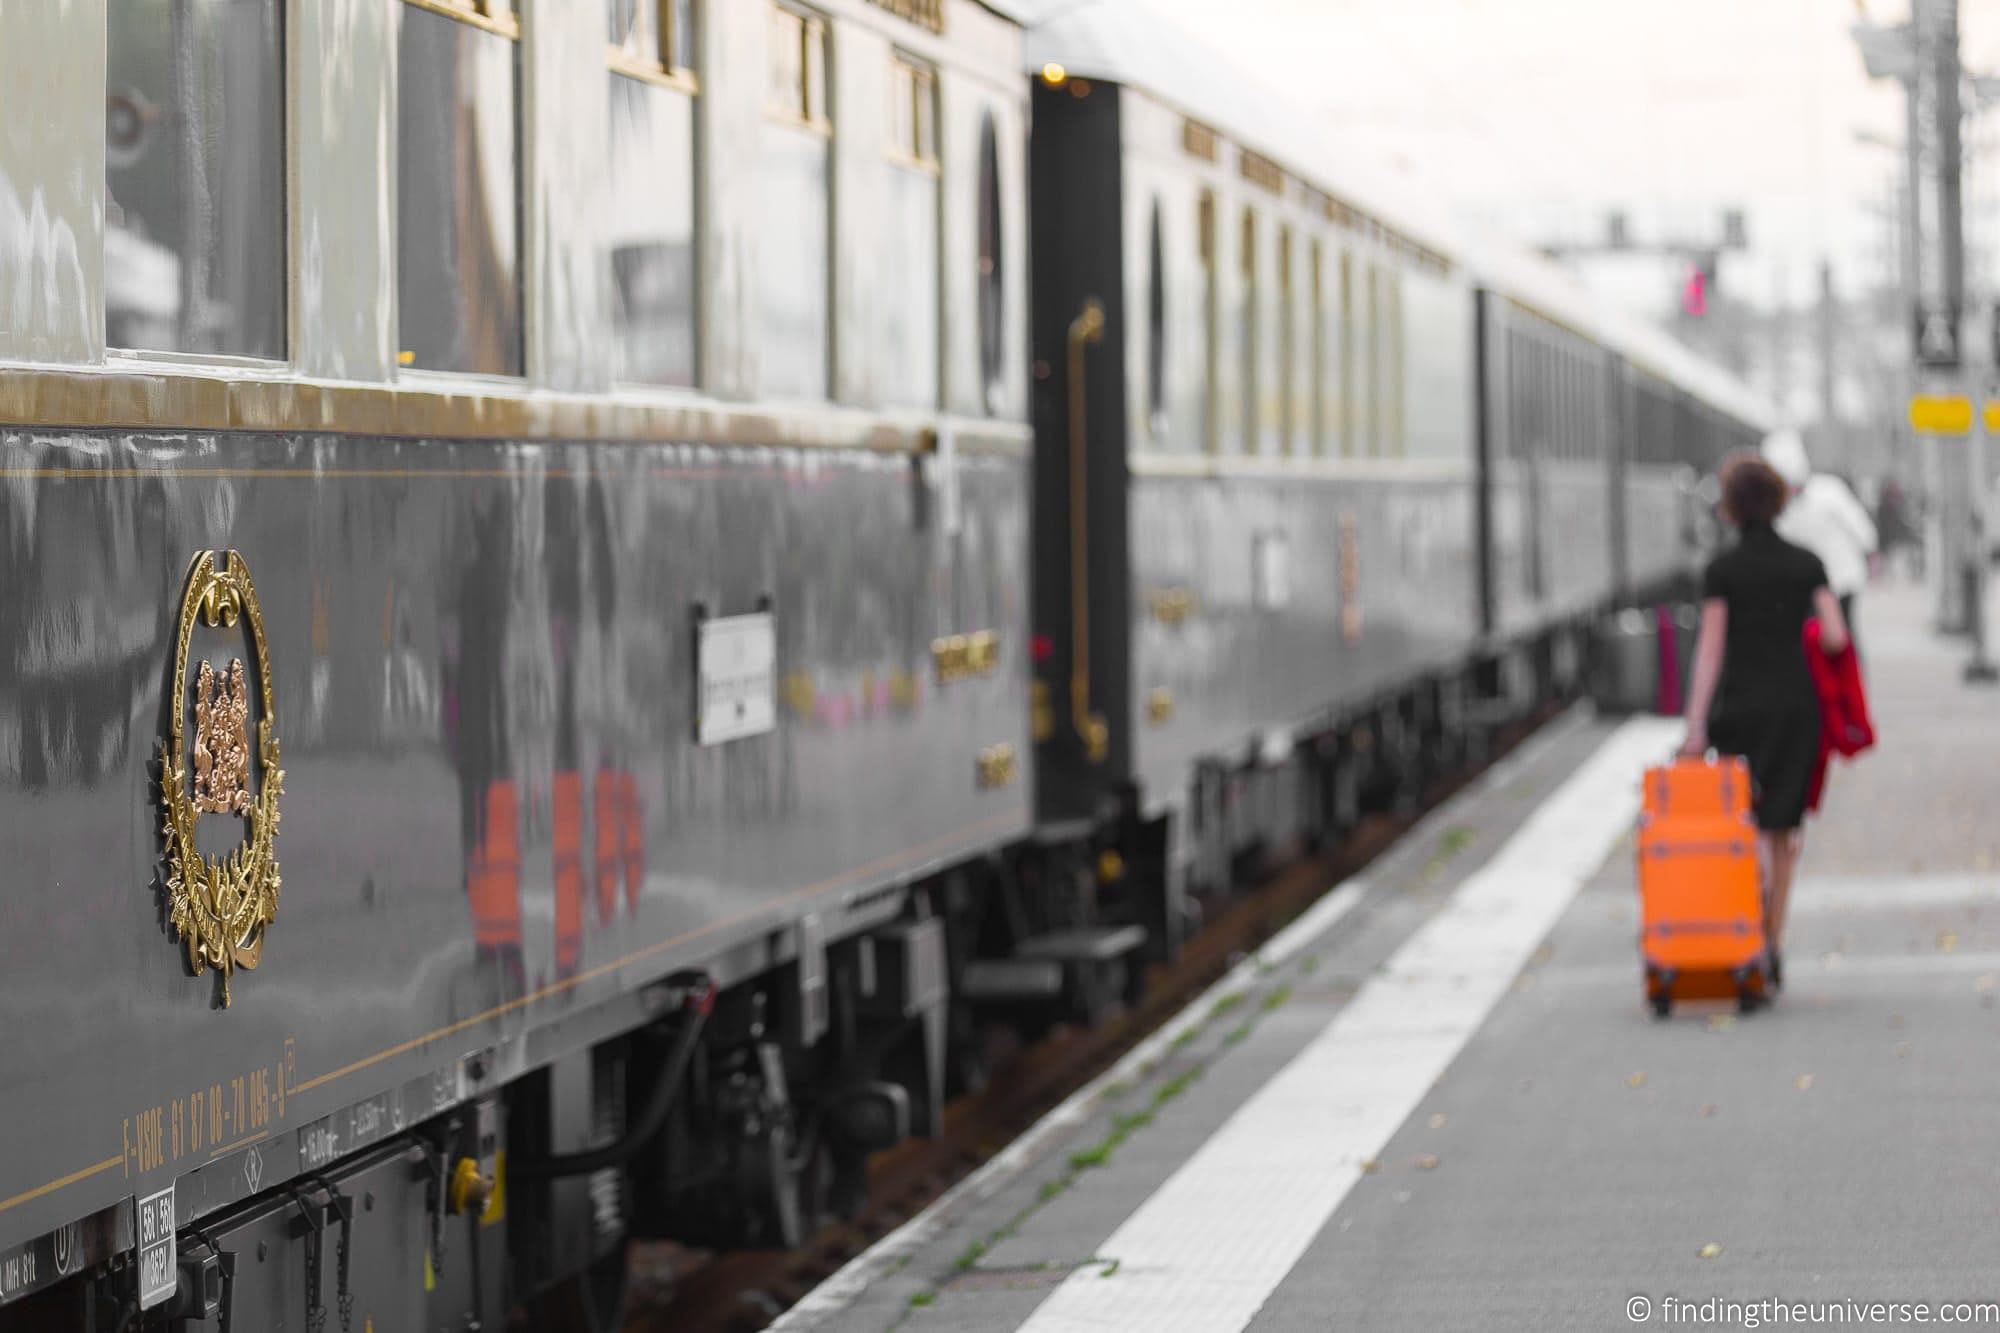 We Tried It: Riding the Real-Life Orient Express